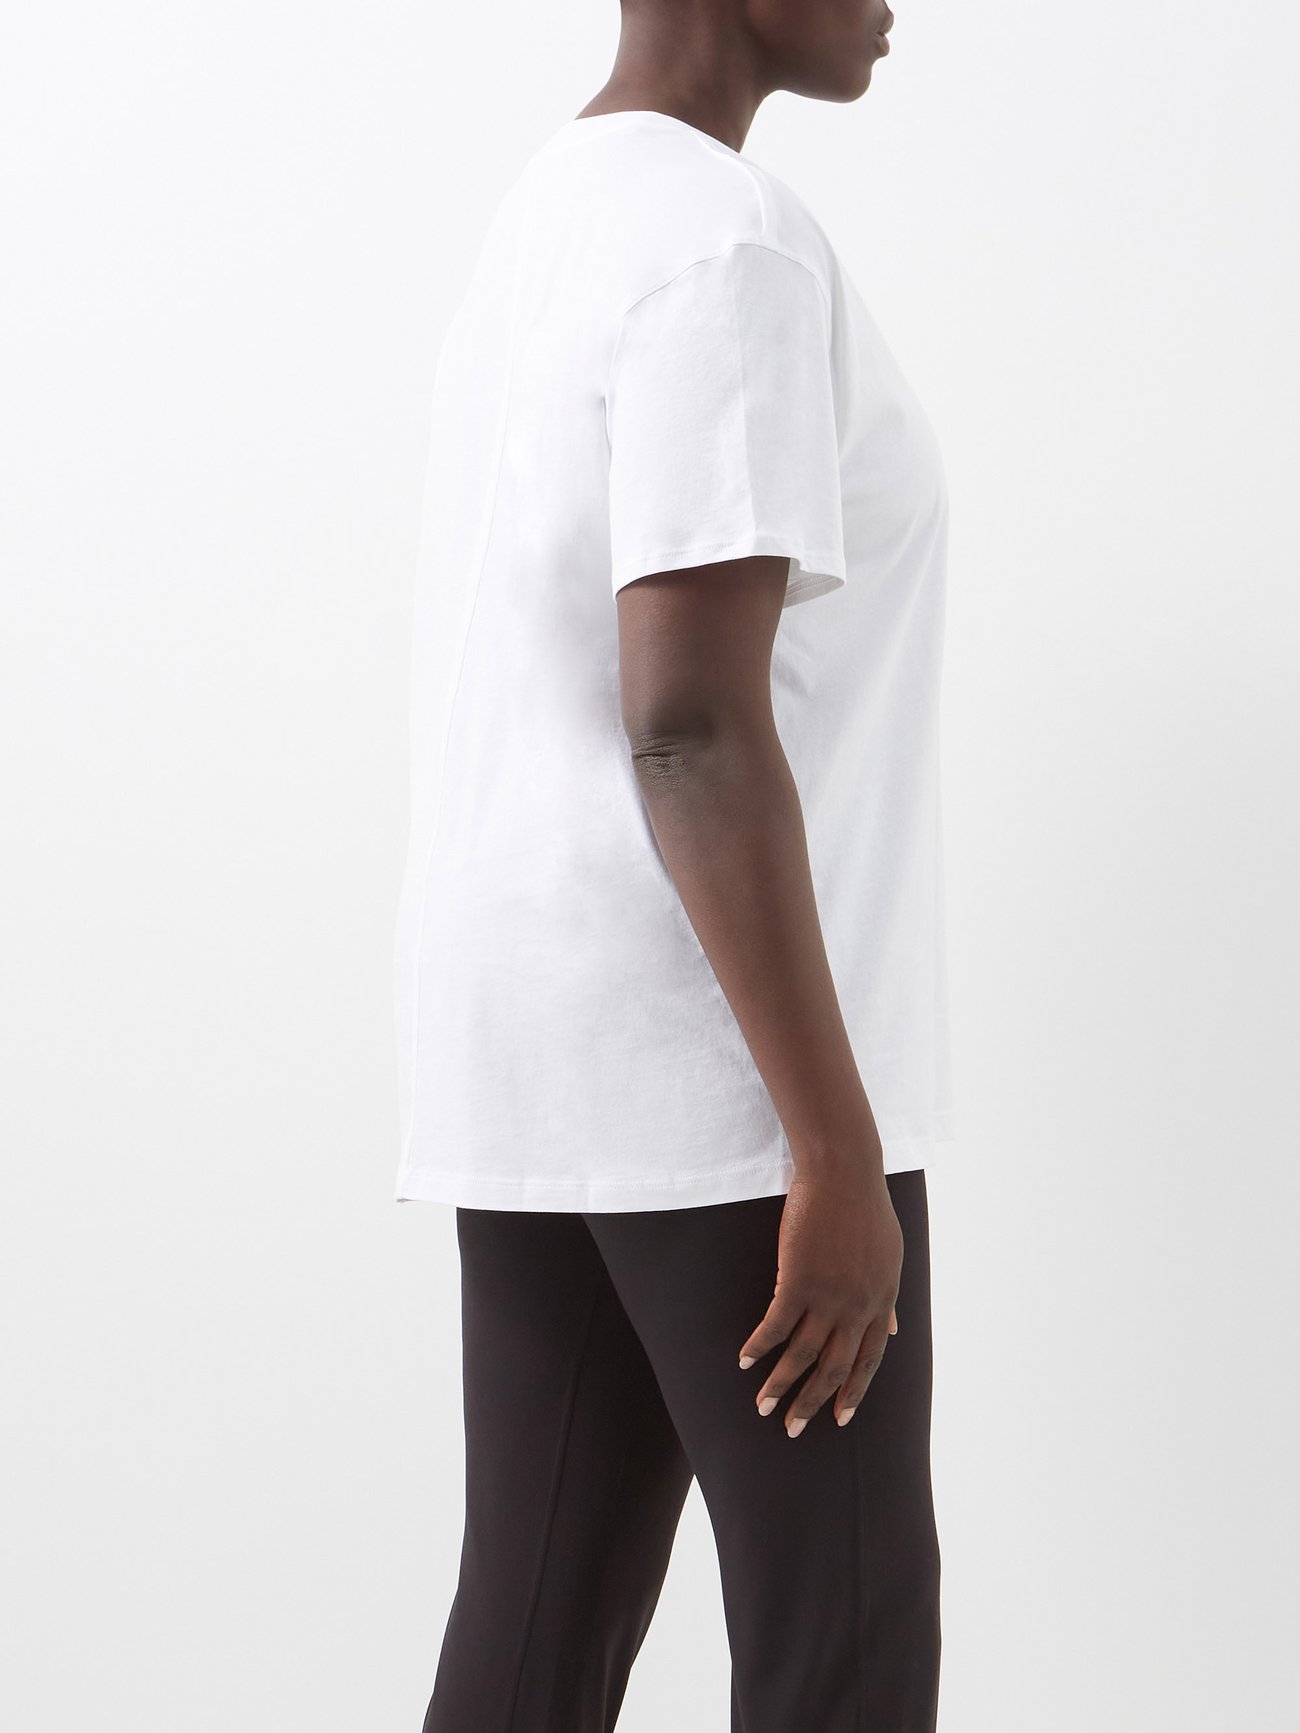 White All Yours crew-neck cotton-blend jersey T-shirt, lululemon